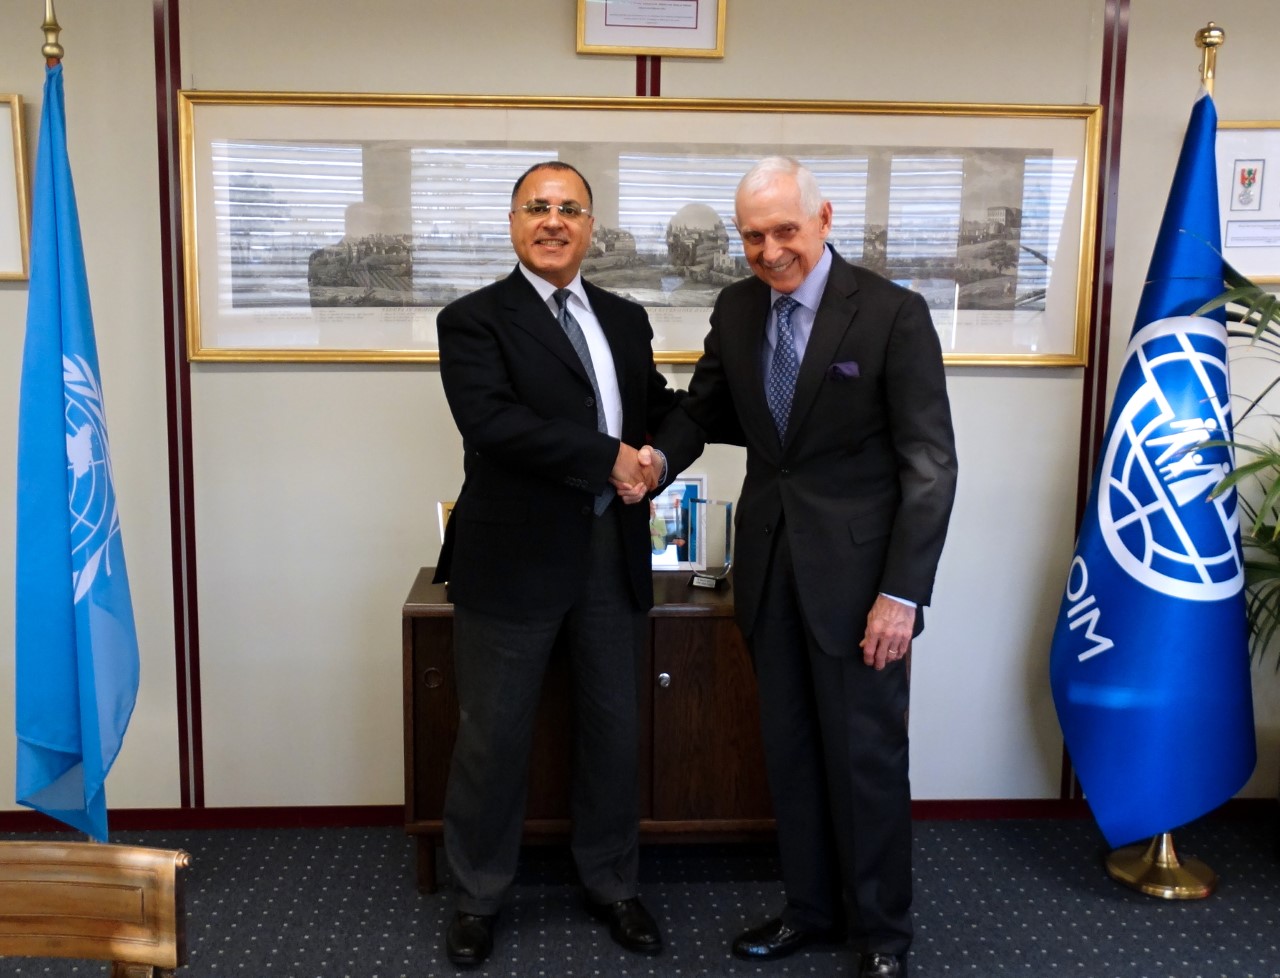 Director General of the (IOM) William Lacy Swing receives Kuwait's Permanent Delegate at the UN Ambassador Jamal Al-Ghuneim